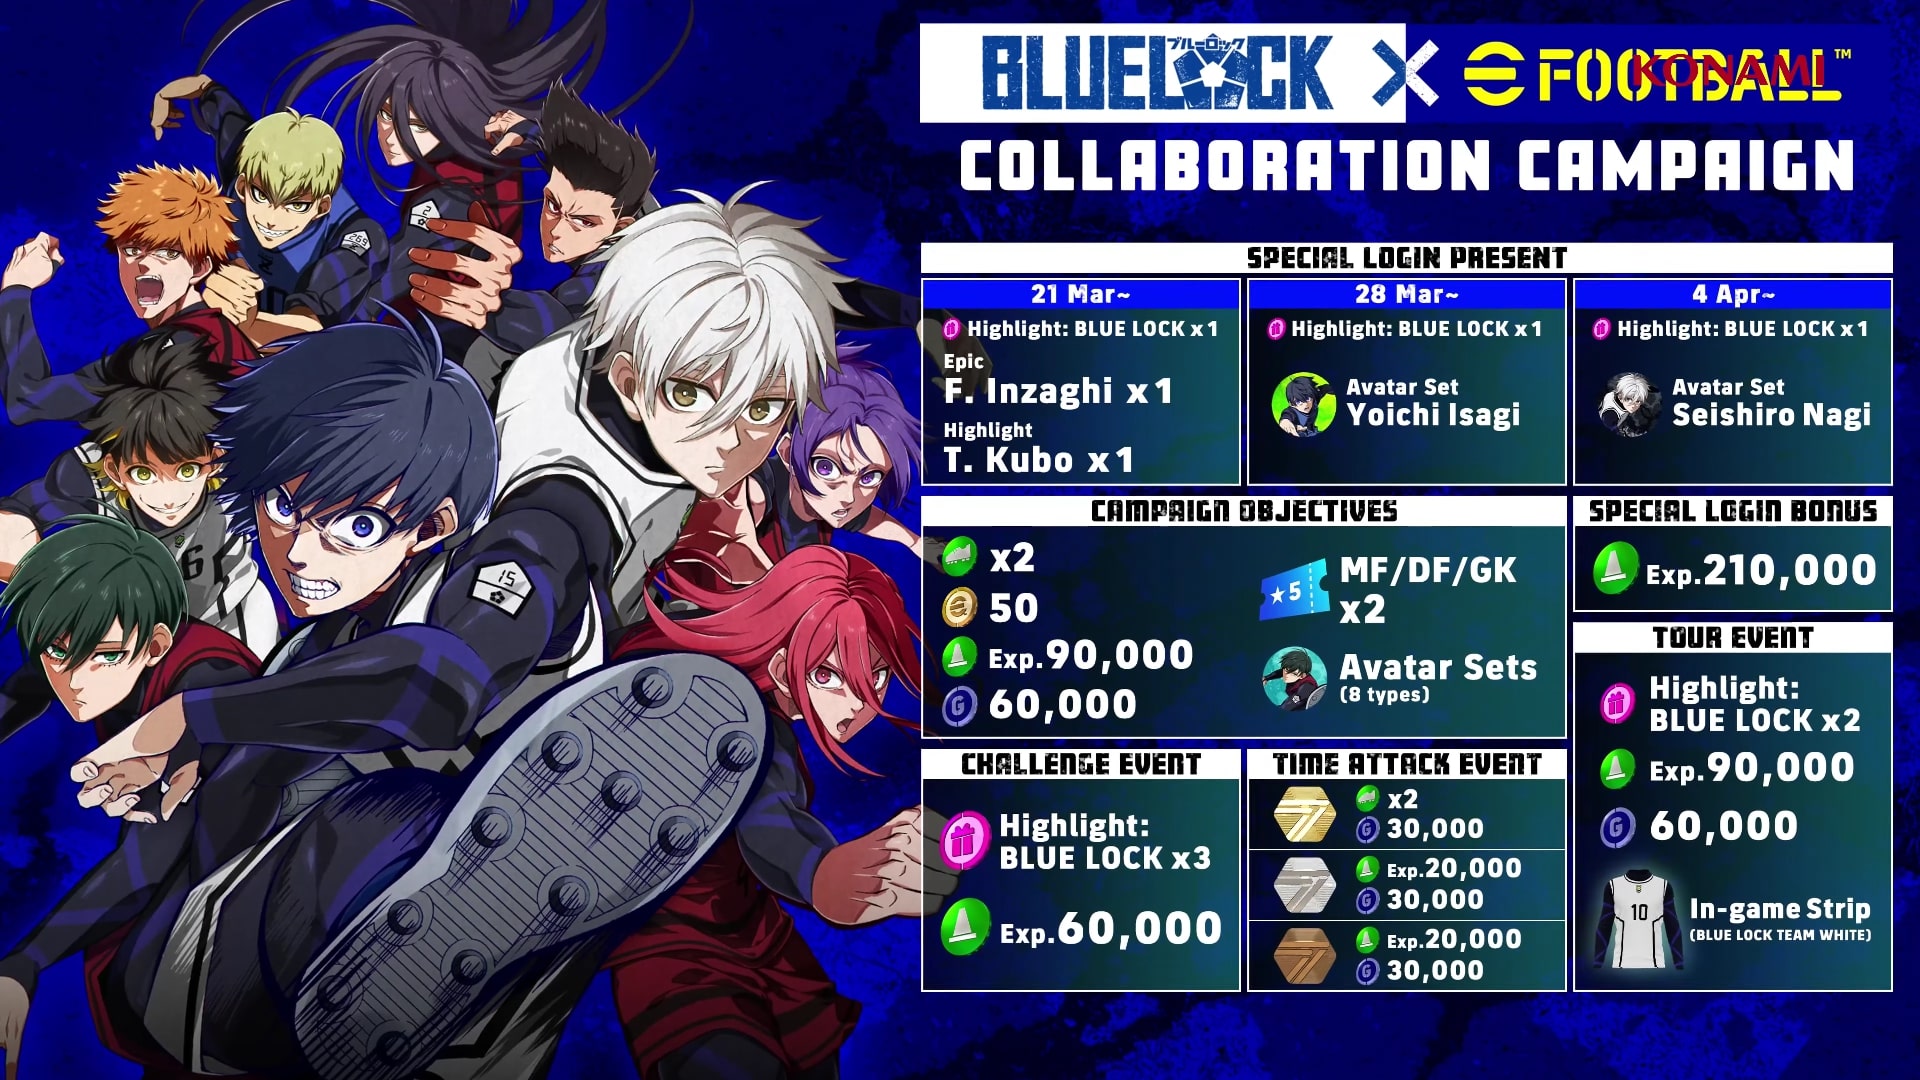 eFootball Joins Forces with Blue Lock Anime for Unique Collaboration!